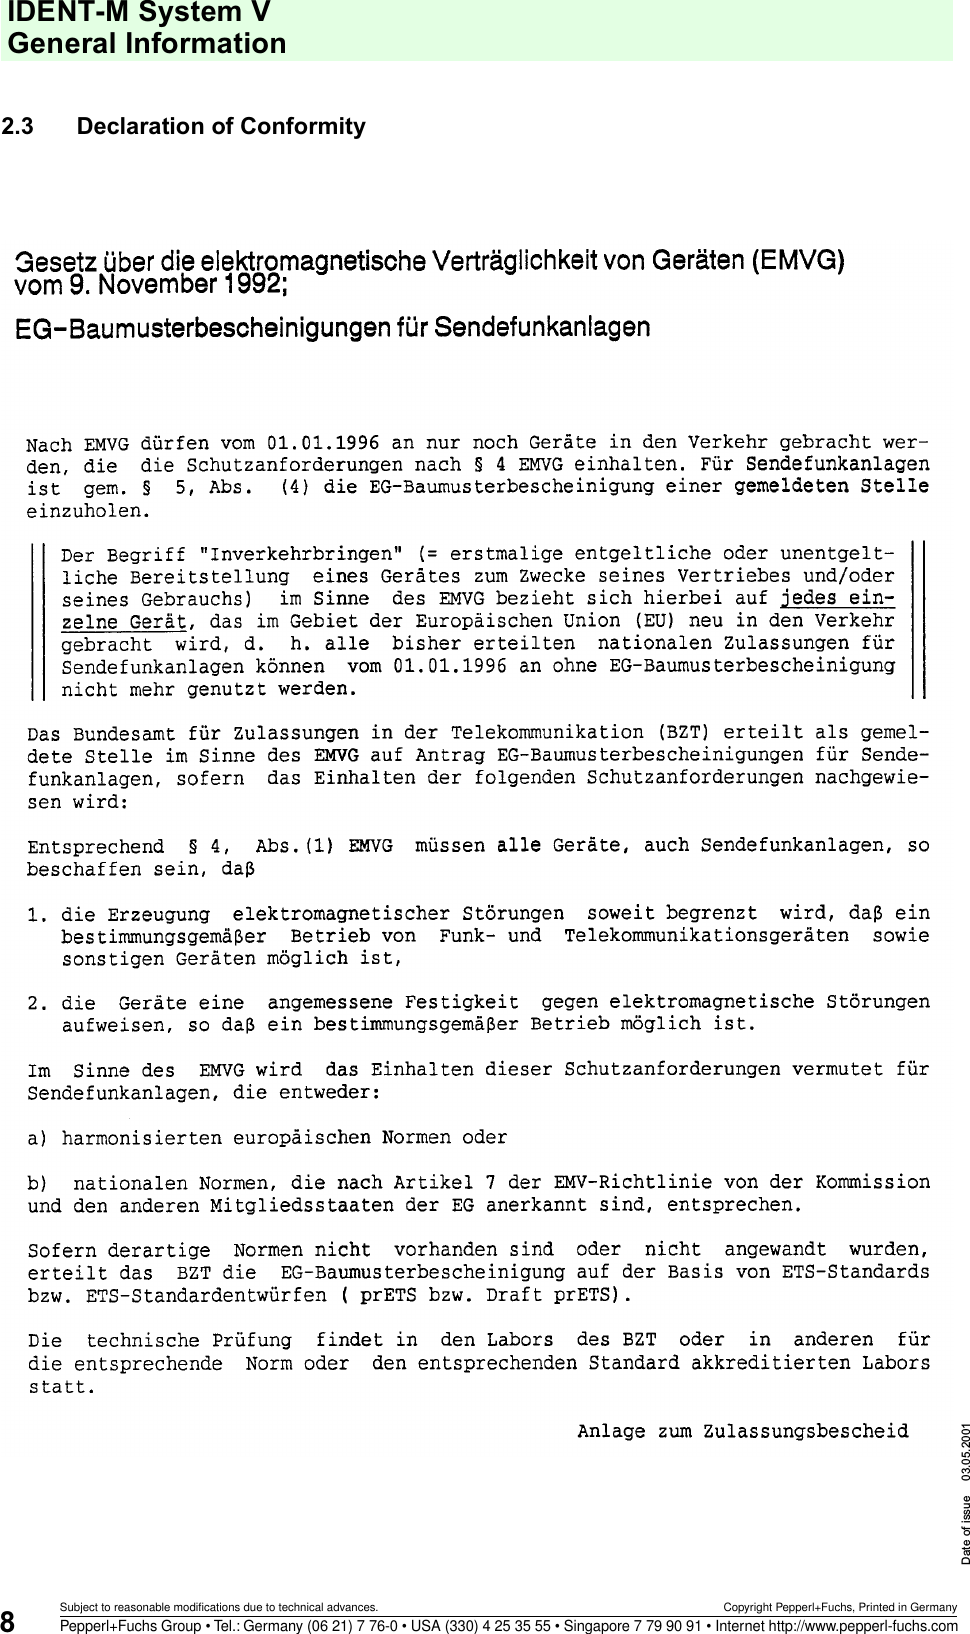 IDENT-M System V General InformationDate of issue 03.05.20018Subject to reasonable modifications due to technical advances. Copyright Pepperl+Fuchs, Printed in GermanyPepperl+Fuchs Group • Tel.: Germany (06 21) 7 76-0 • USA (330) 4 25 35 55 • Singapore 7 79 90 91 • Internet http://www.pepperl-fuchs.com2.3 Declaration of Conformity